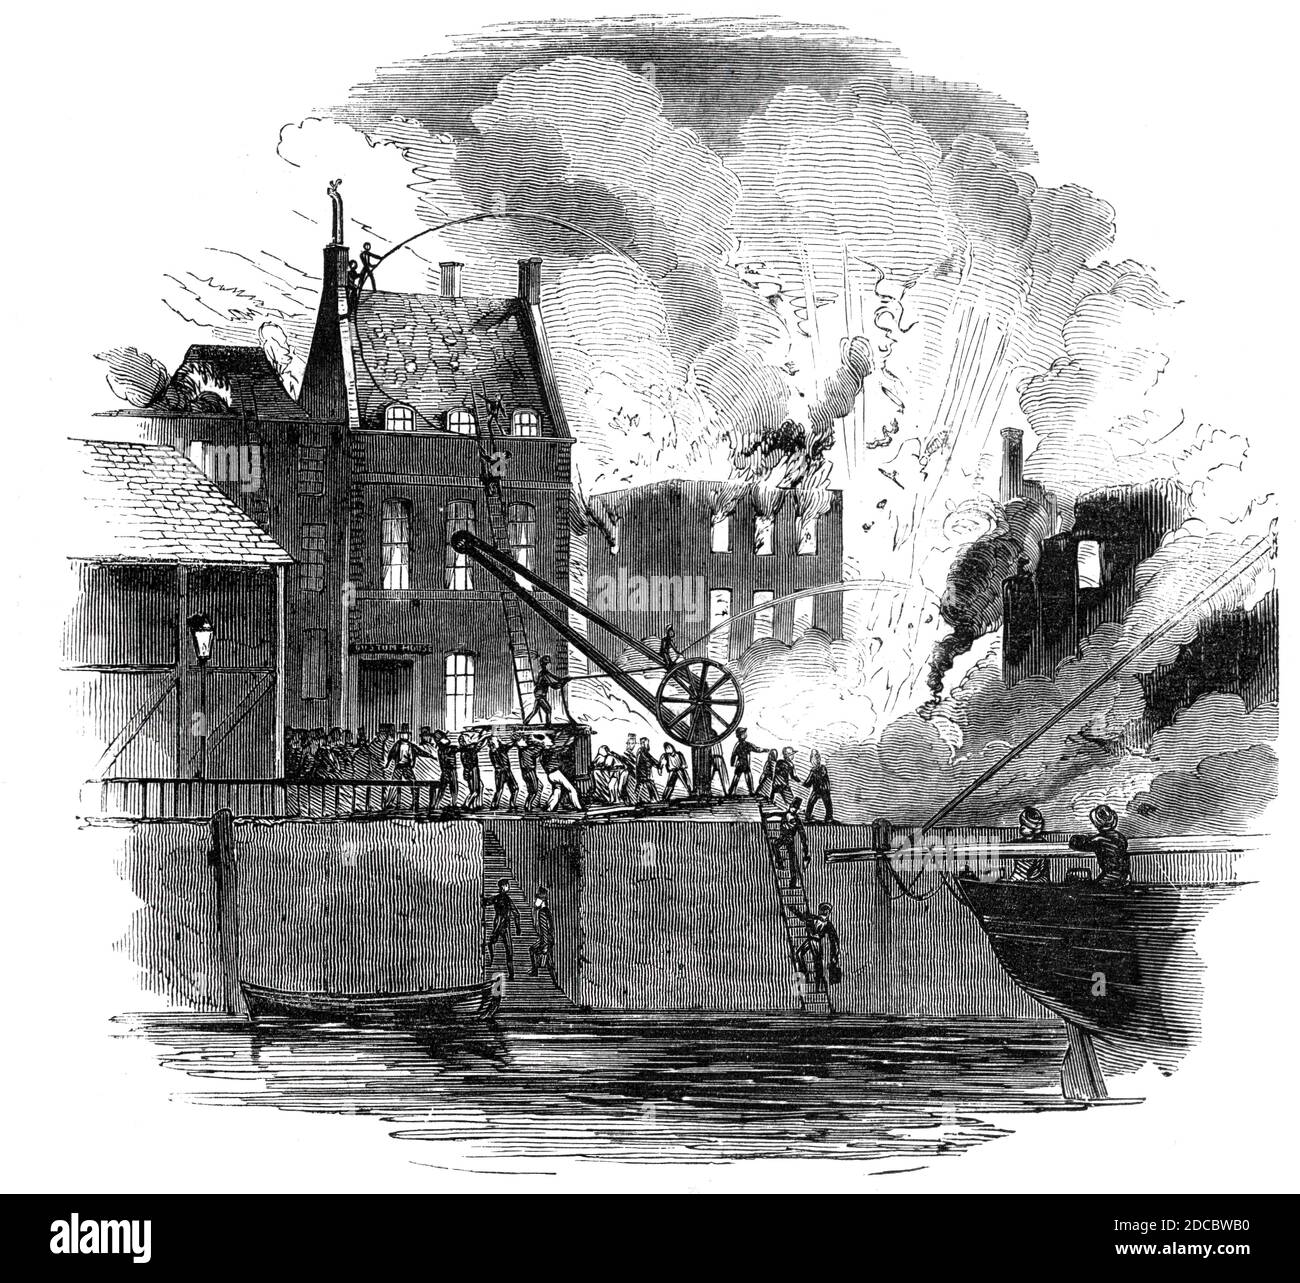 Fire at Boston - from a drawing by Mr. W. Caister, 1844. The Boston Herald: '...the town of Boston [Massachusetts] was visited by a most awful conflagration, which broke out in the oil and colour warehouse of Mr. T. Slator, ship chandler and general dealer, in South-street, which spread with great rapidity, and involved a mass of valuable property in ruin.&#xa0;The six town engines were speedily on the spot; the tide was high, and no deficiency of water therefore existed, but all the engines were destitute of suction-pipes, excepting one, which was not of length sufficient to reach the water.. Stock Photo